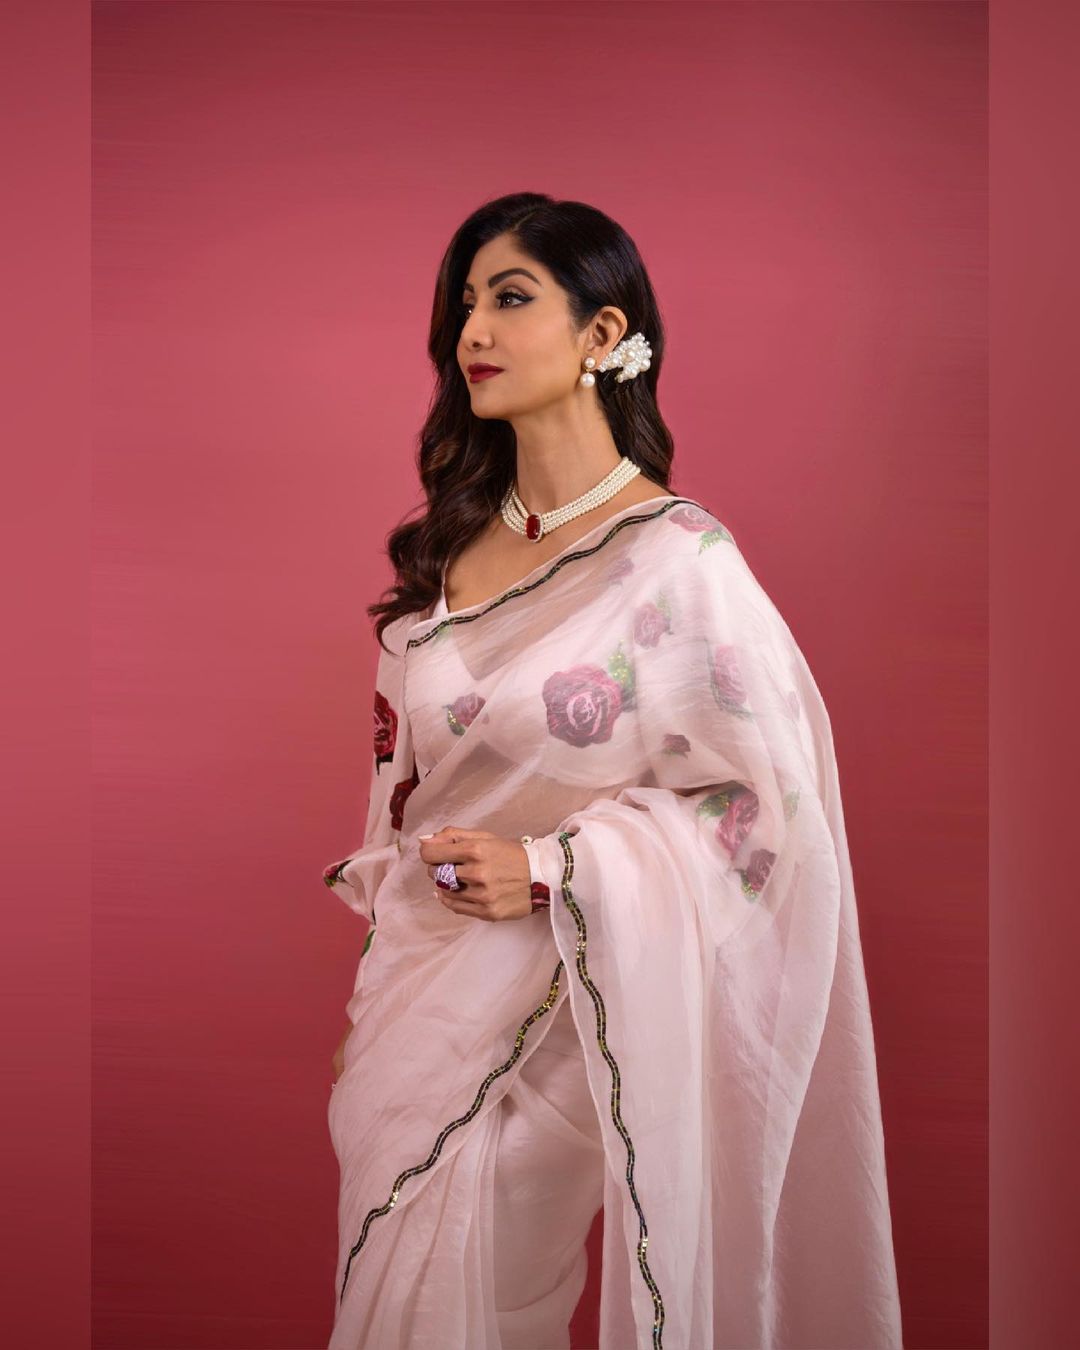 Shilpa Shetty played the magic of beauty in white sarees, see photos 9842